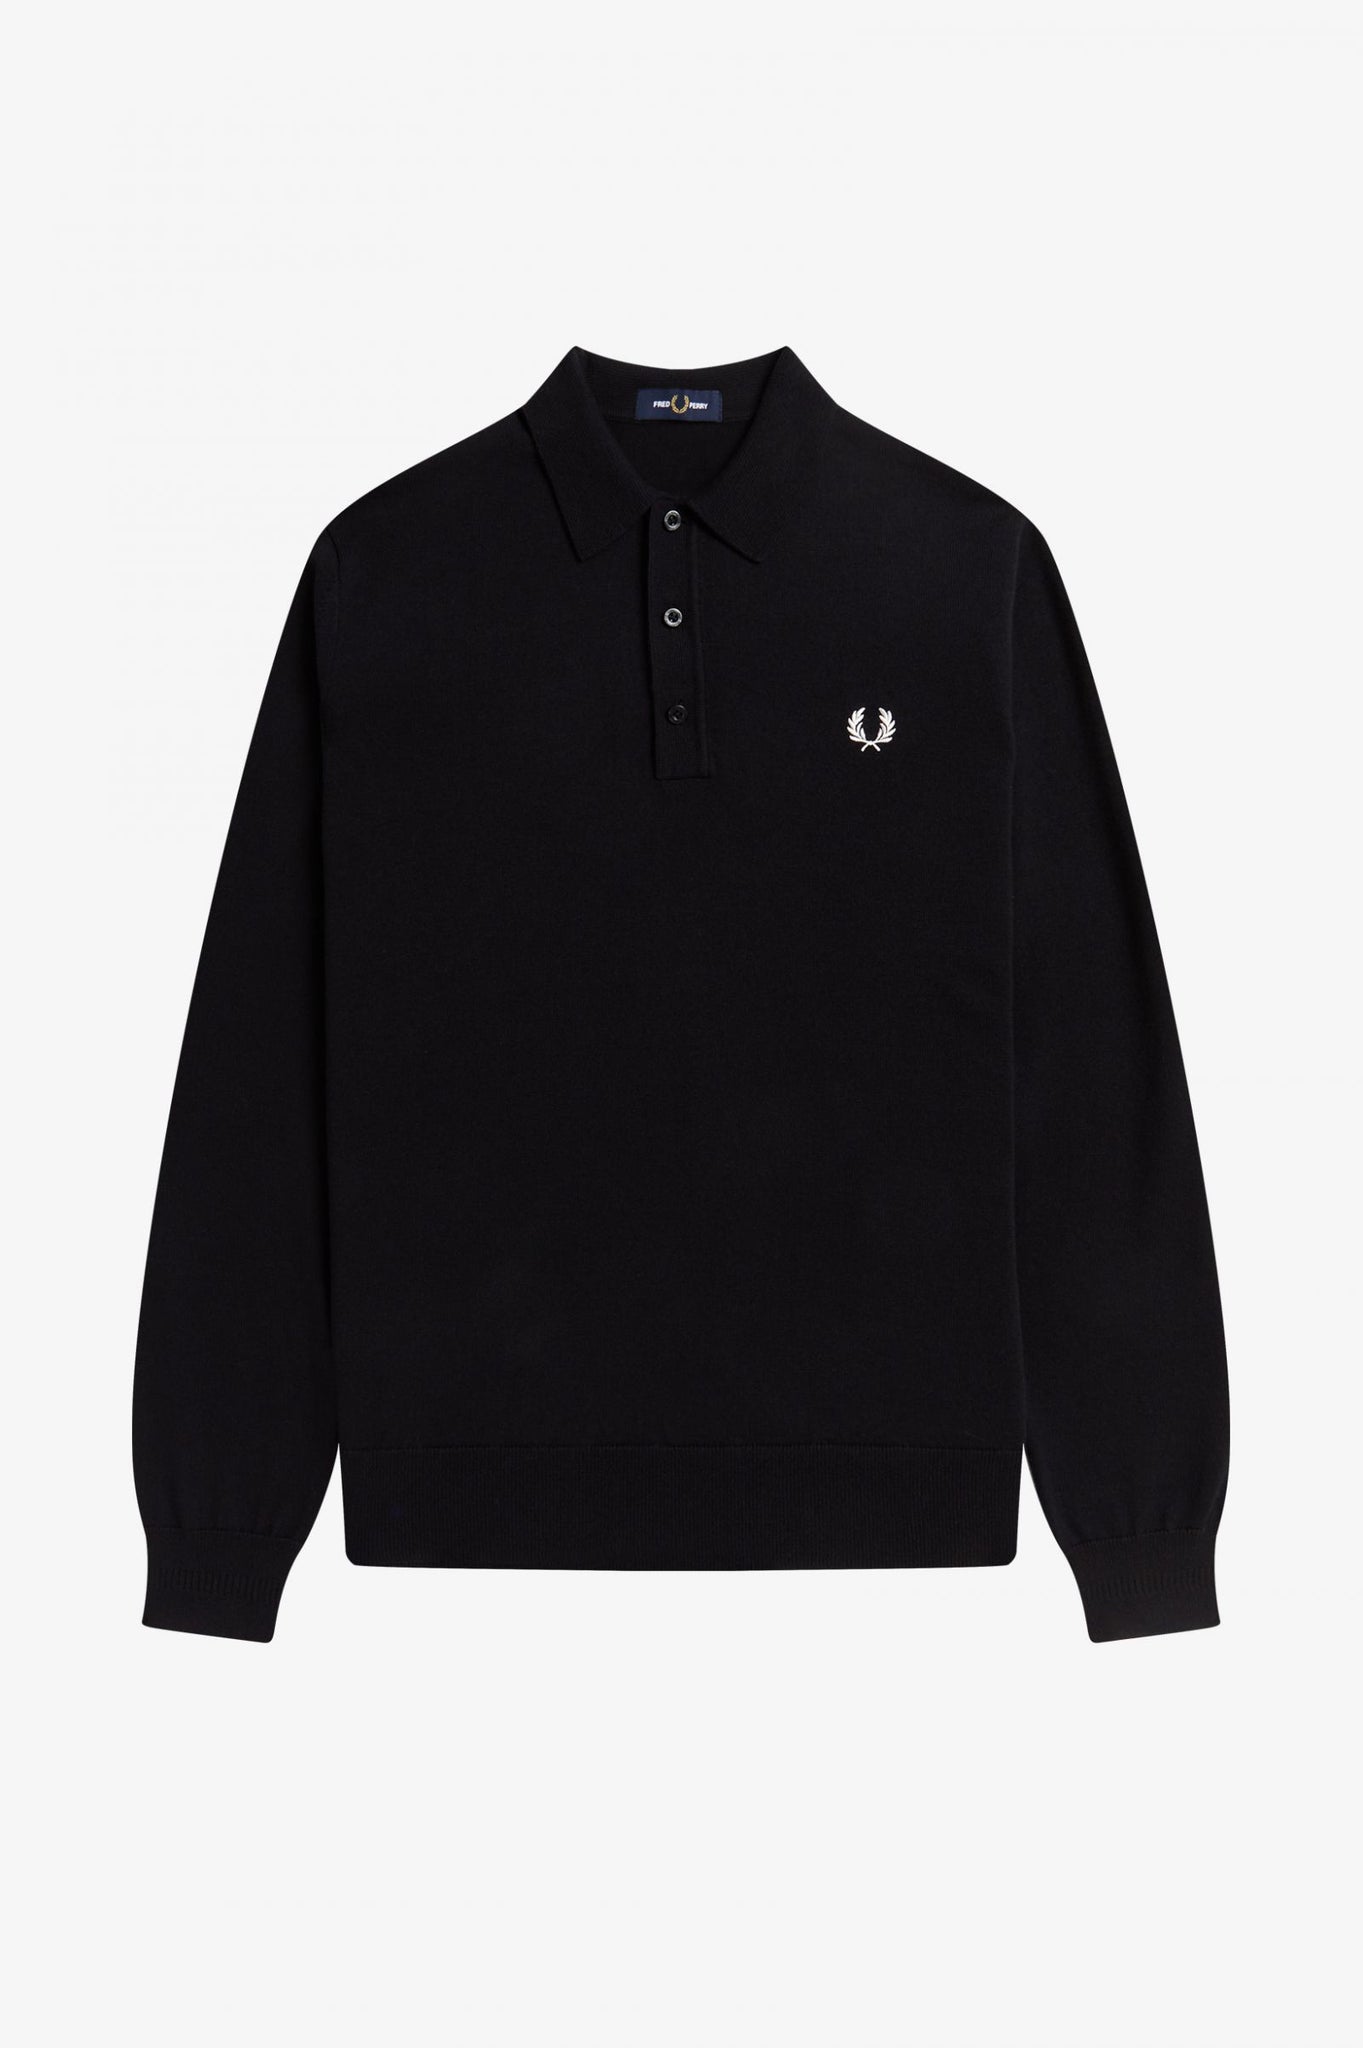 Fred Perry K4535 - Long Sleeve Knitted Shirt in Black XL